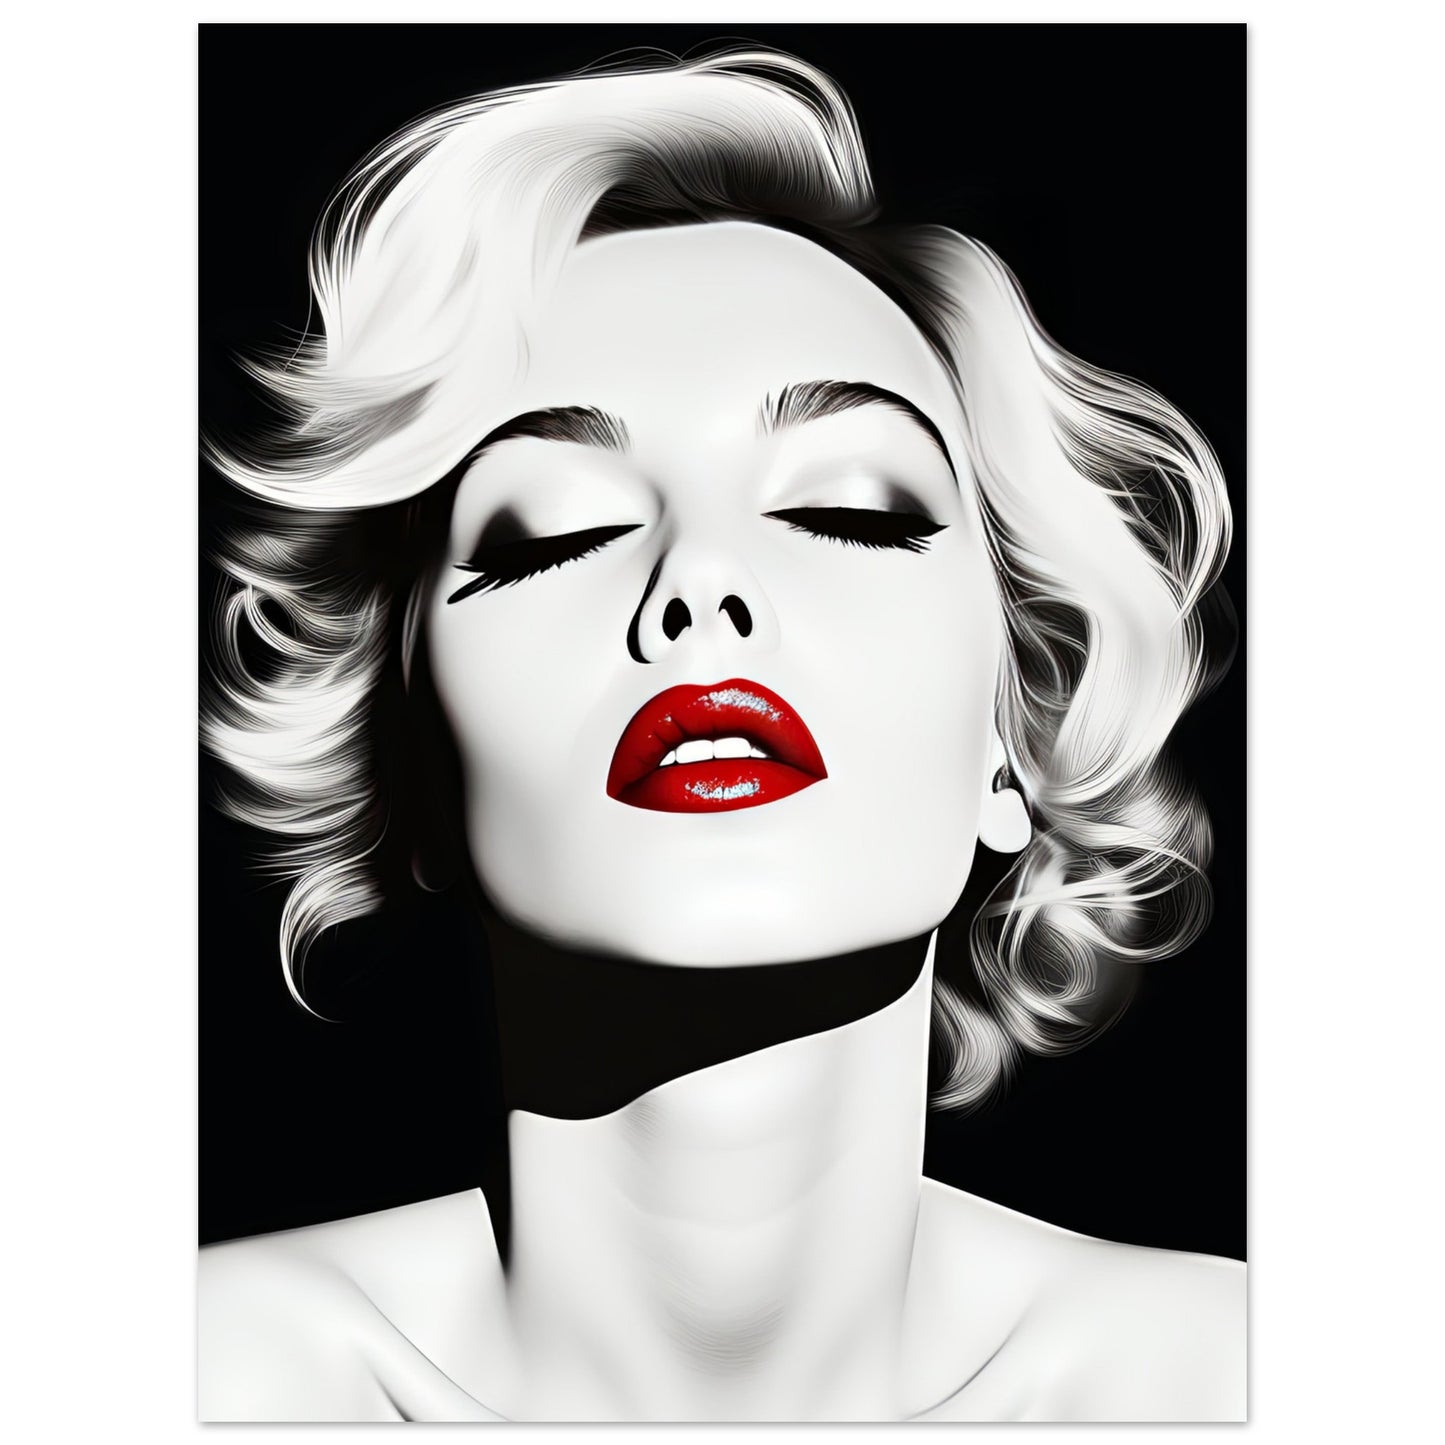 A minimalist portrait titled "M.M." showcasing the iconic Marilyn Monroe in monochrome tones, with her eyes closed and vibrant red lips, set against a deep black background. This contemporary art print captures the essence of the legendary actress in a modern, avant-garde style.